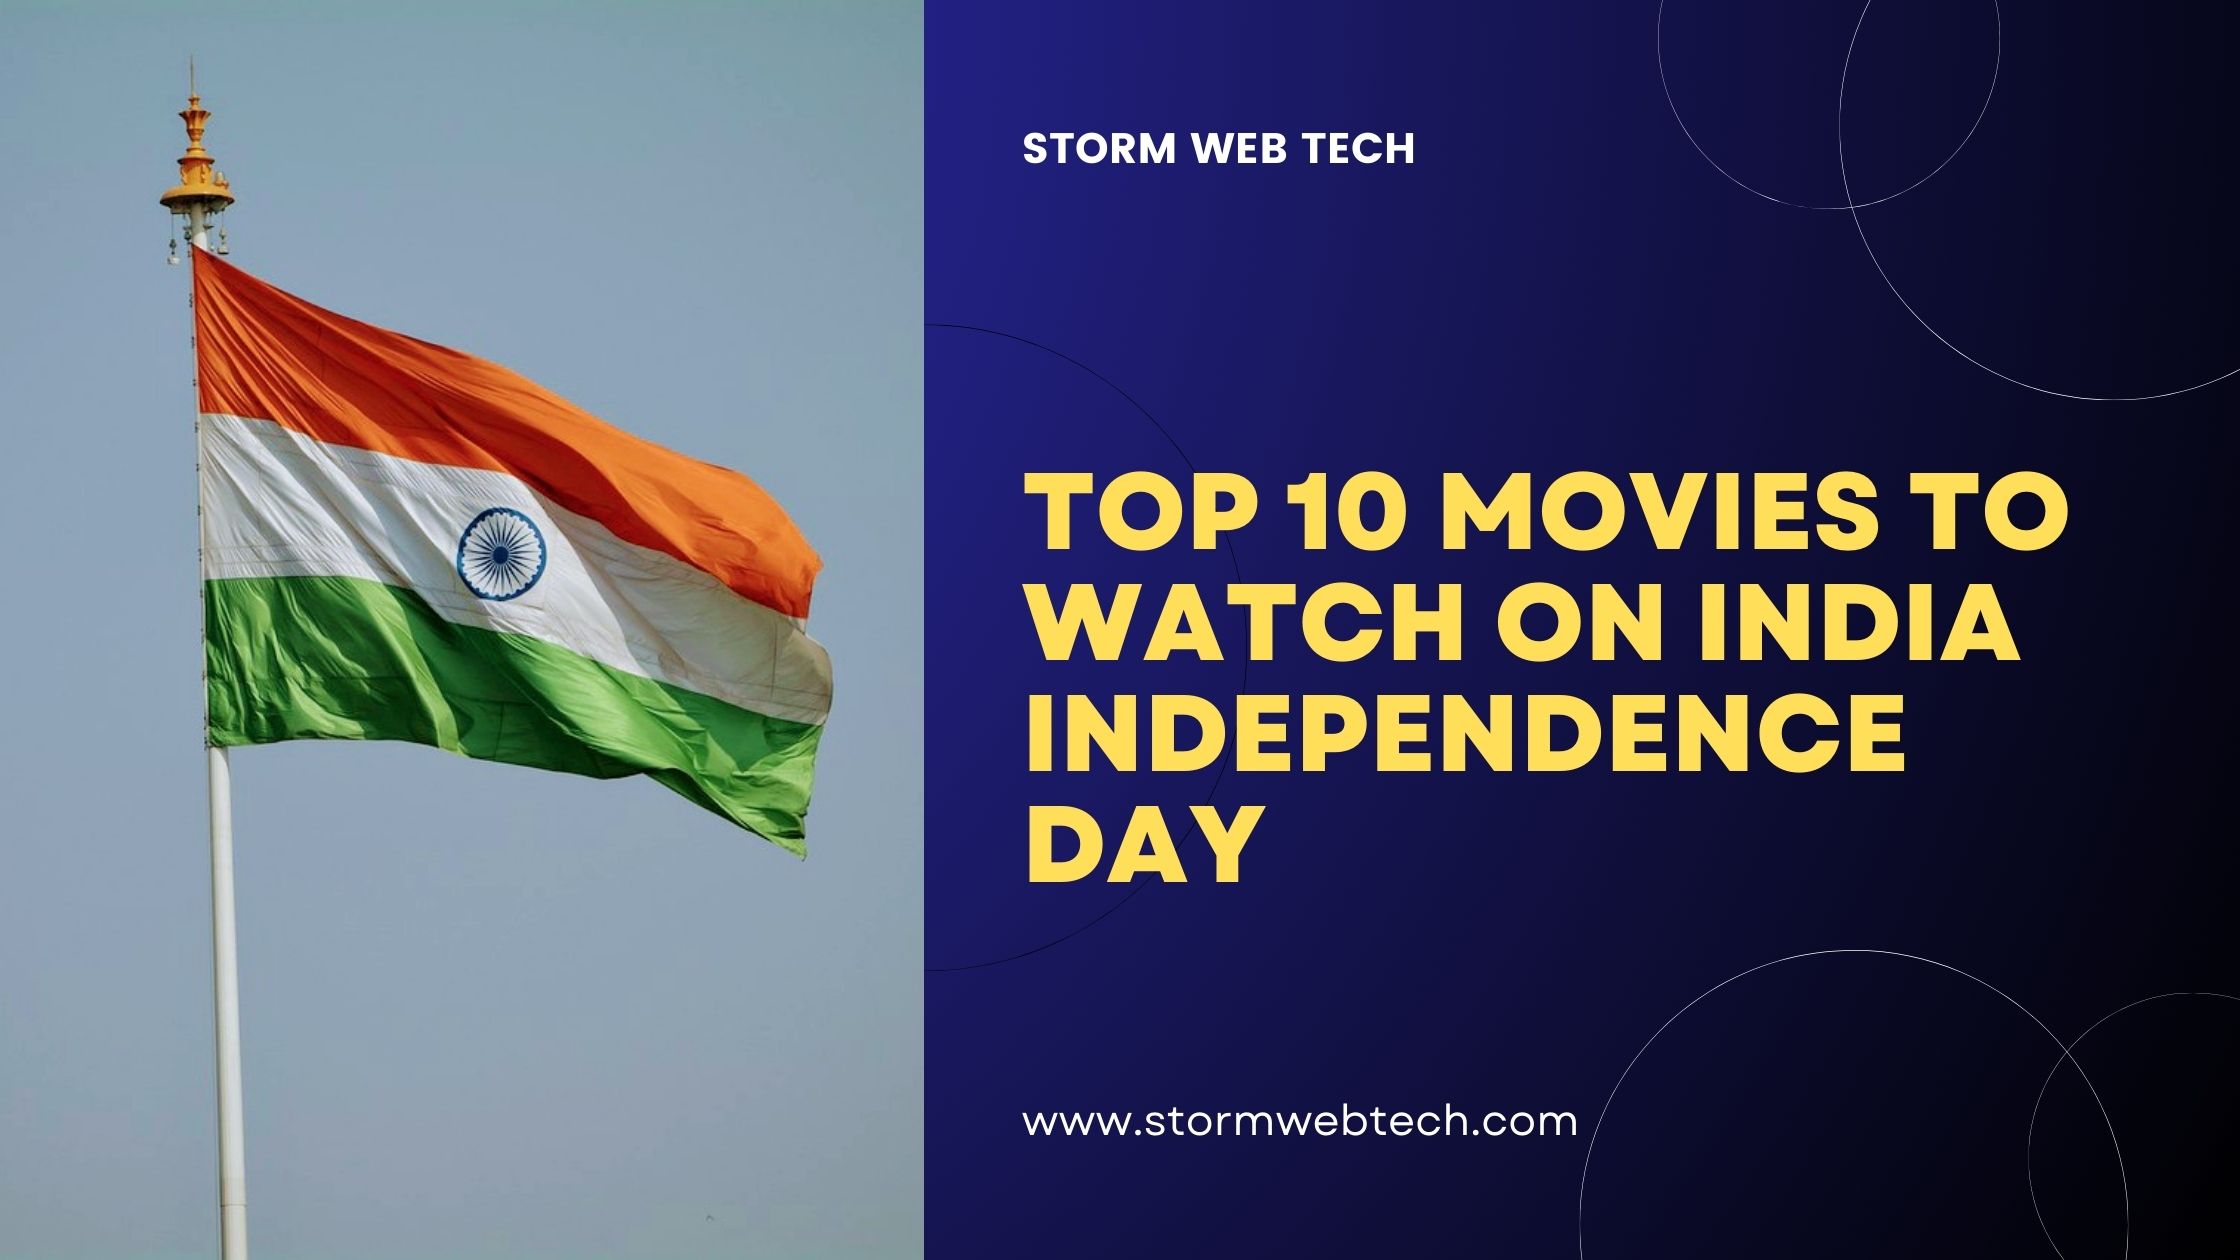 top 10 movies to watch on India Independence Day not only entertain but also educate and inspire, offering a glimpse into India's diverse history